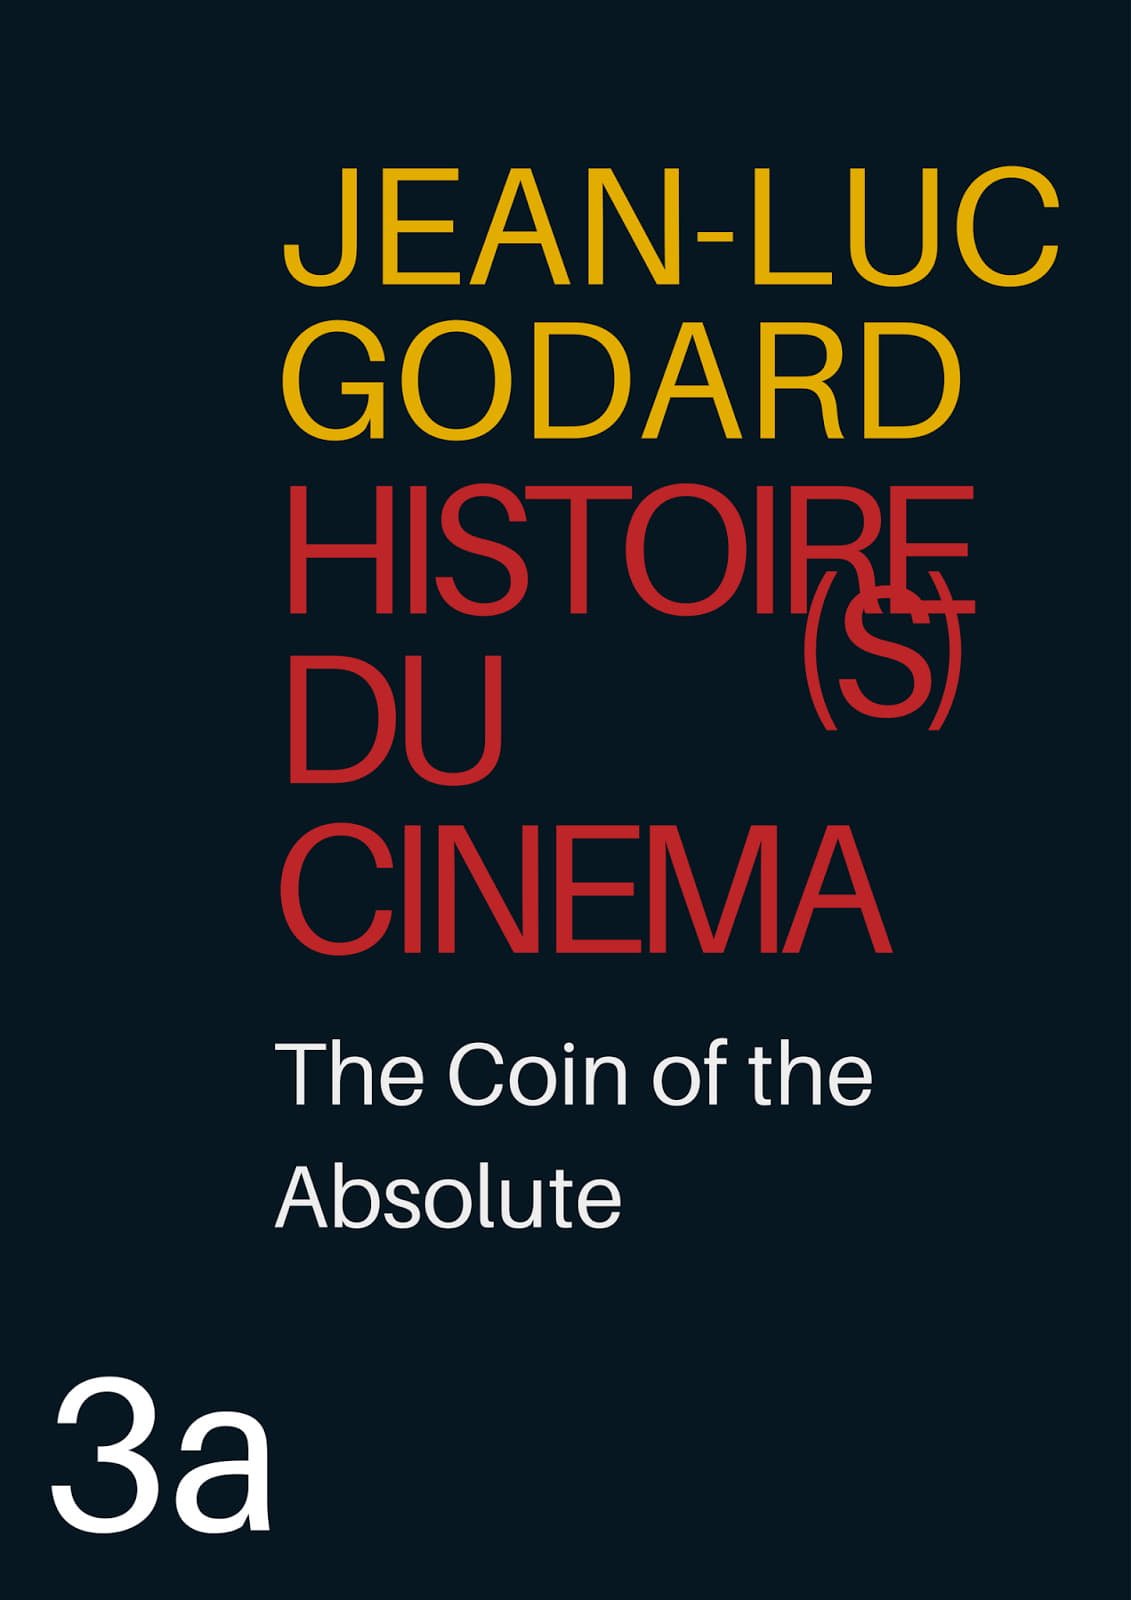 Histoire(s) du Cinéma 3a: The Coin of the Absolute (1998)